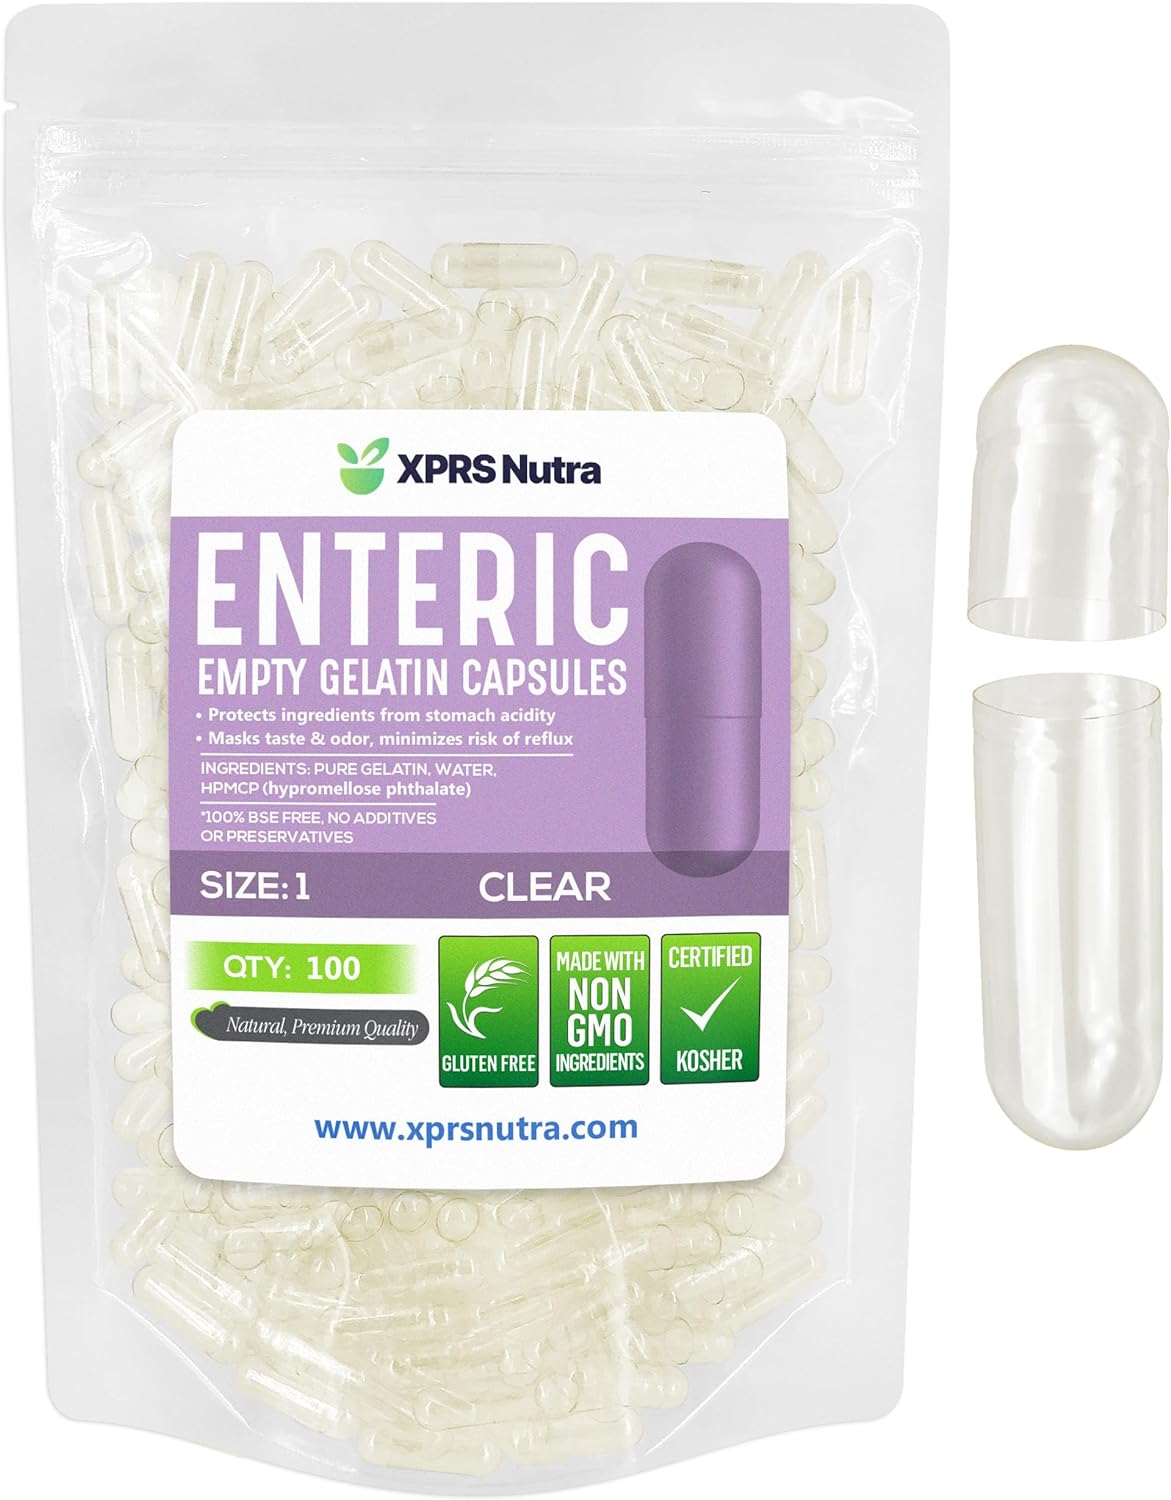 Empty Clear Enteric Coated Gelatin Capsules